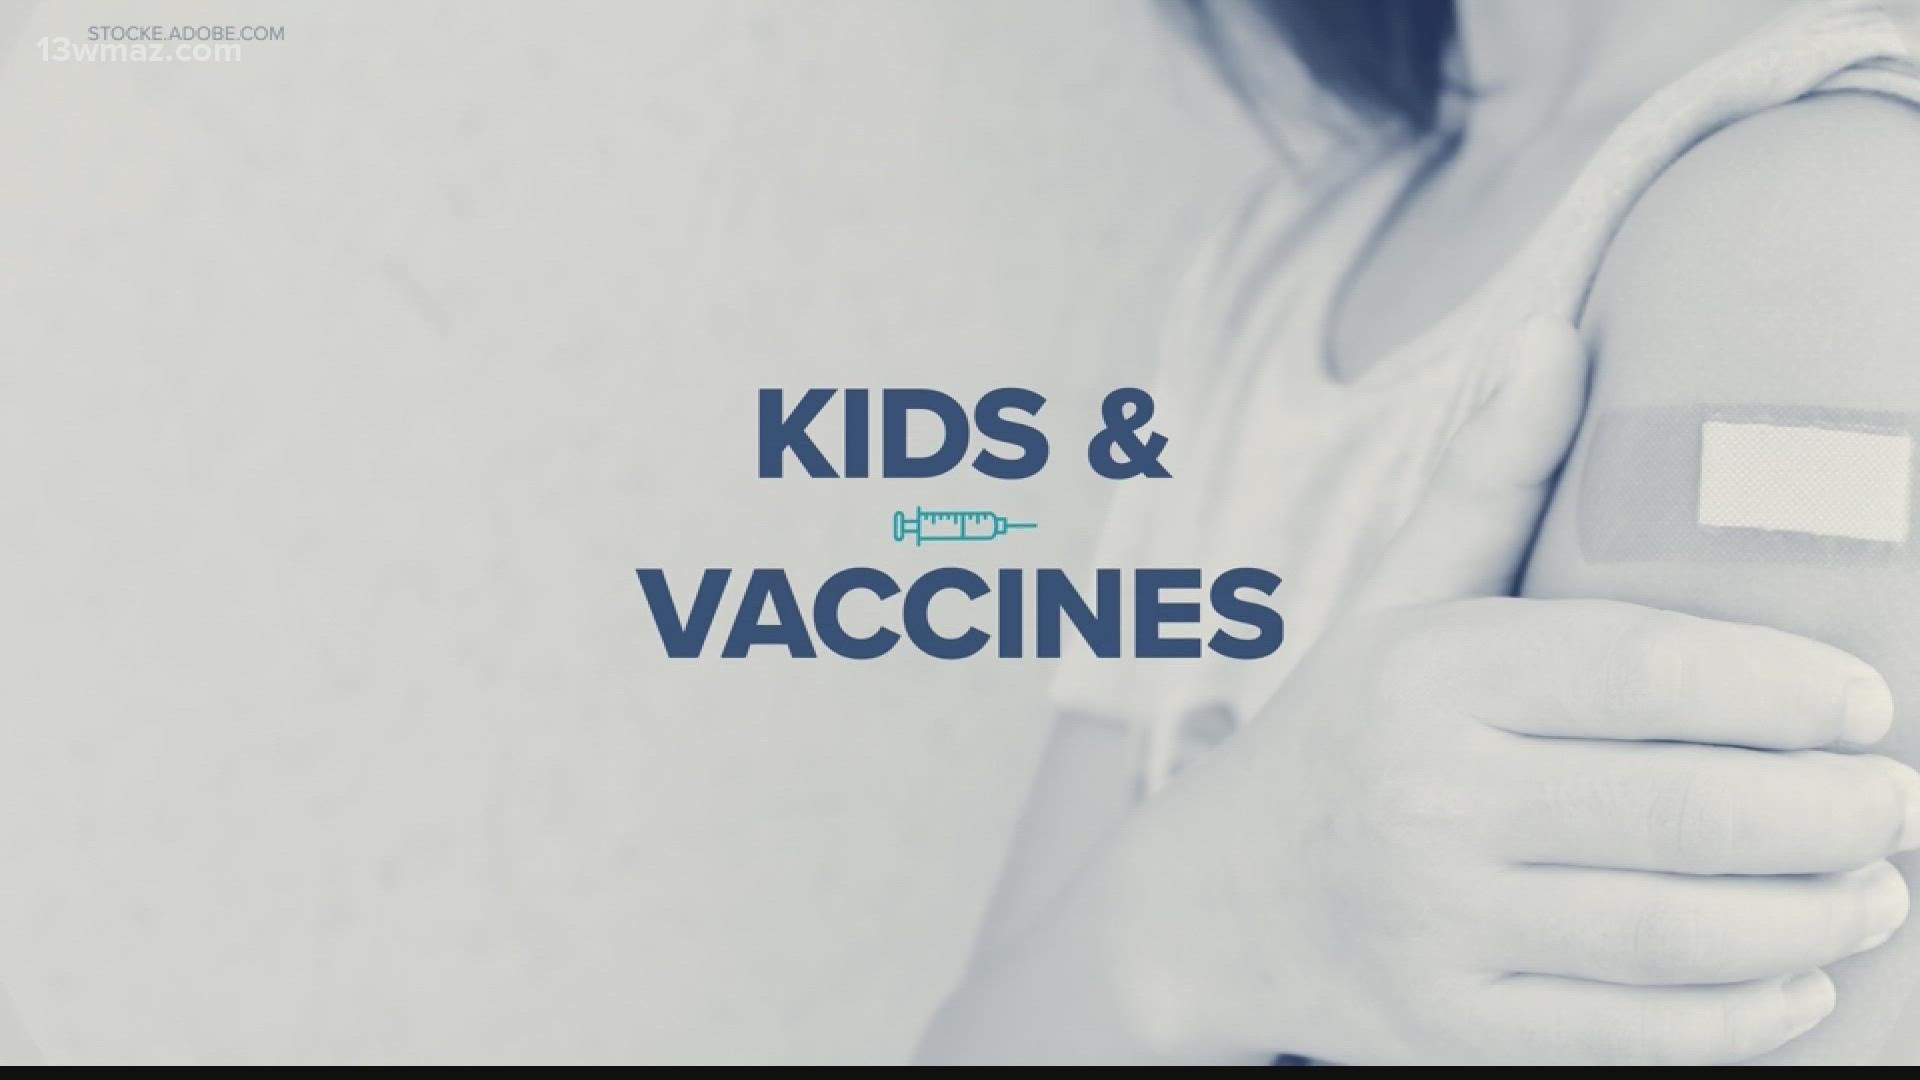 Vaccines are now available for children, and the approval is sparking discussion among doctors and parents.